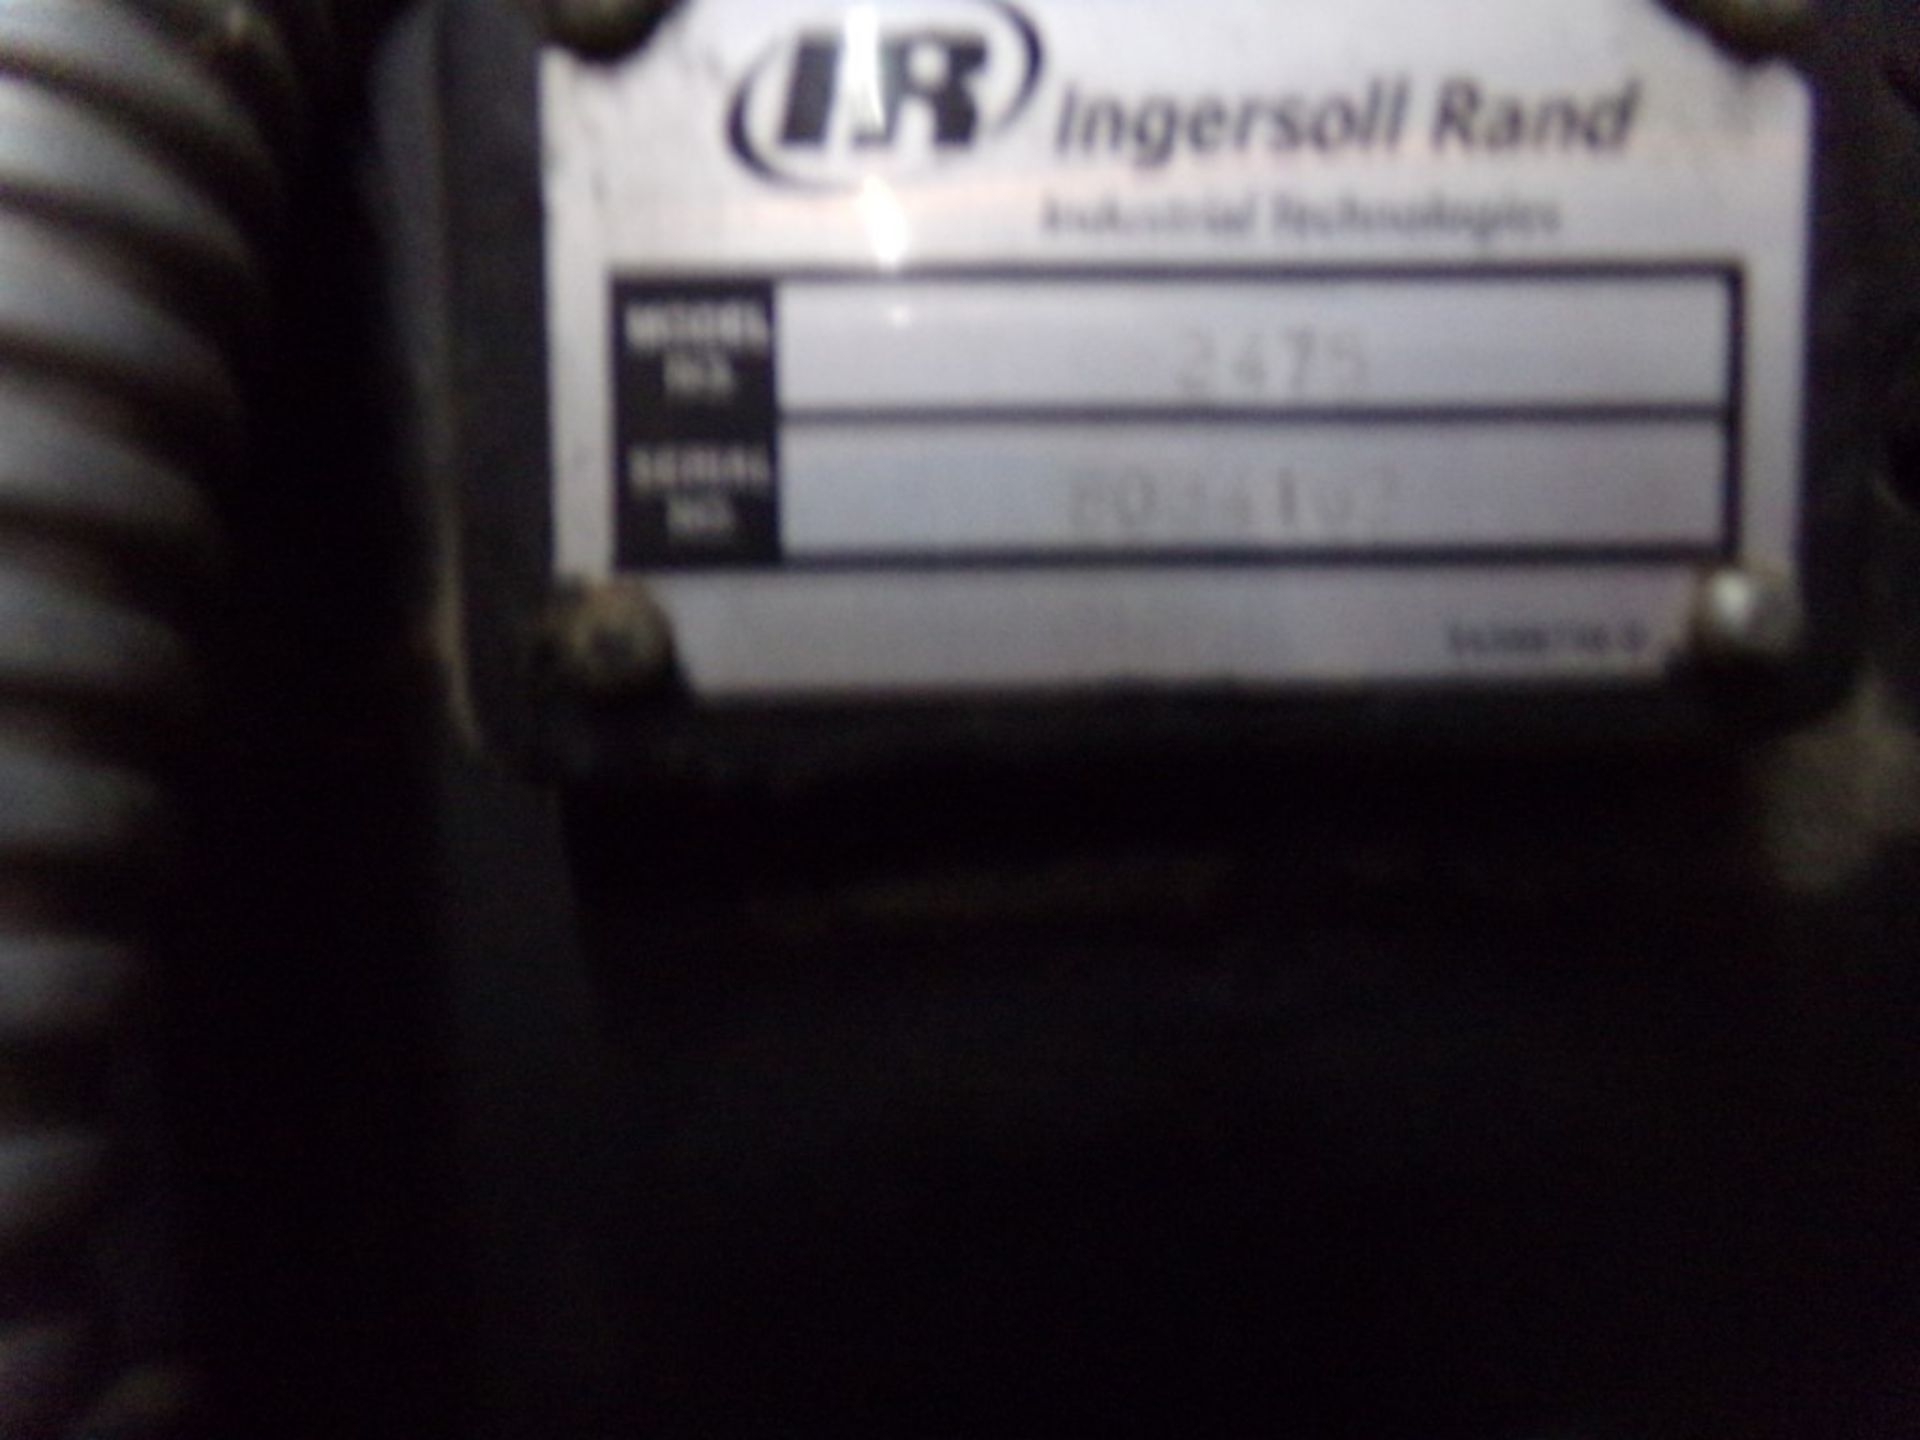 Ingersoll Rand Air Compressor 2475, 5.5 Hp, 208/230 Volt, 1-Phase, Works Good - Image 2 of 2